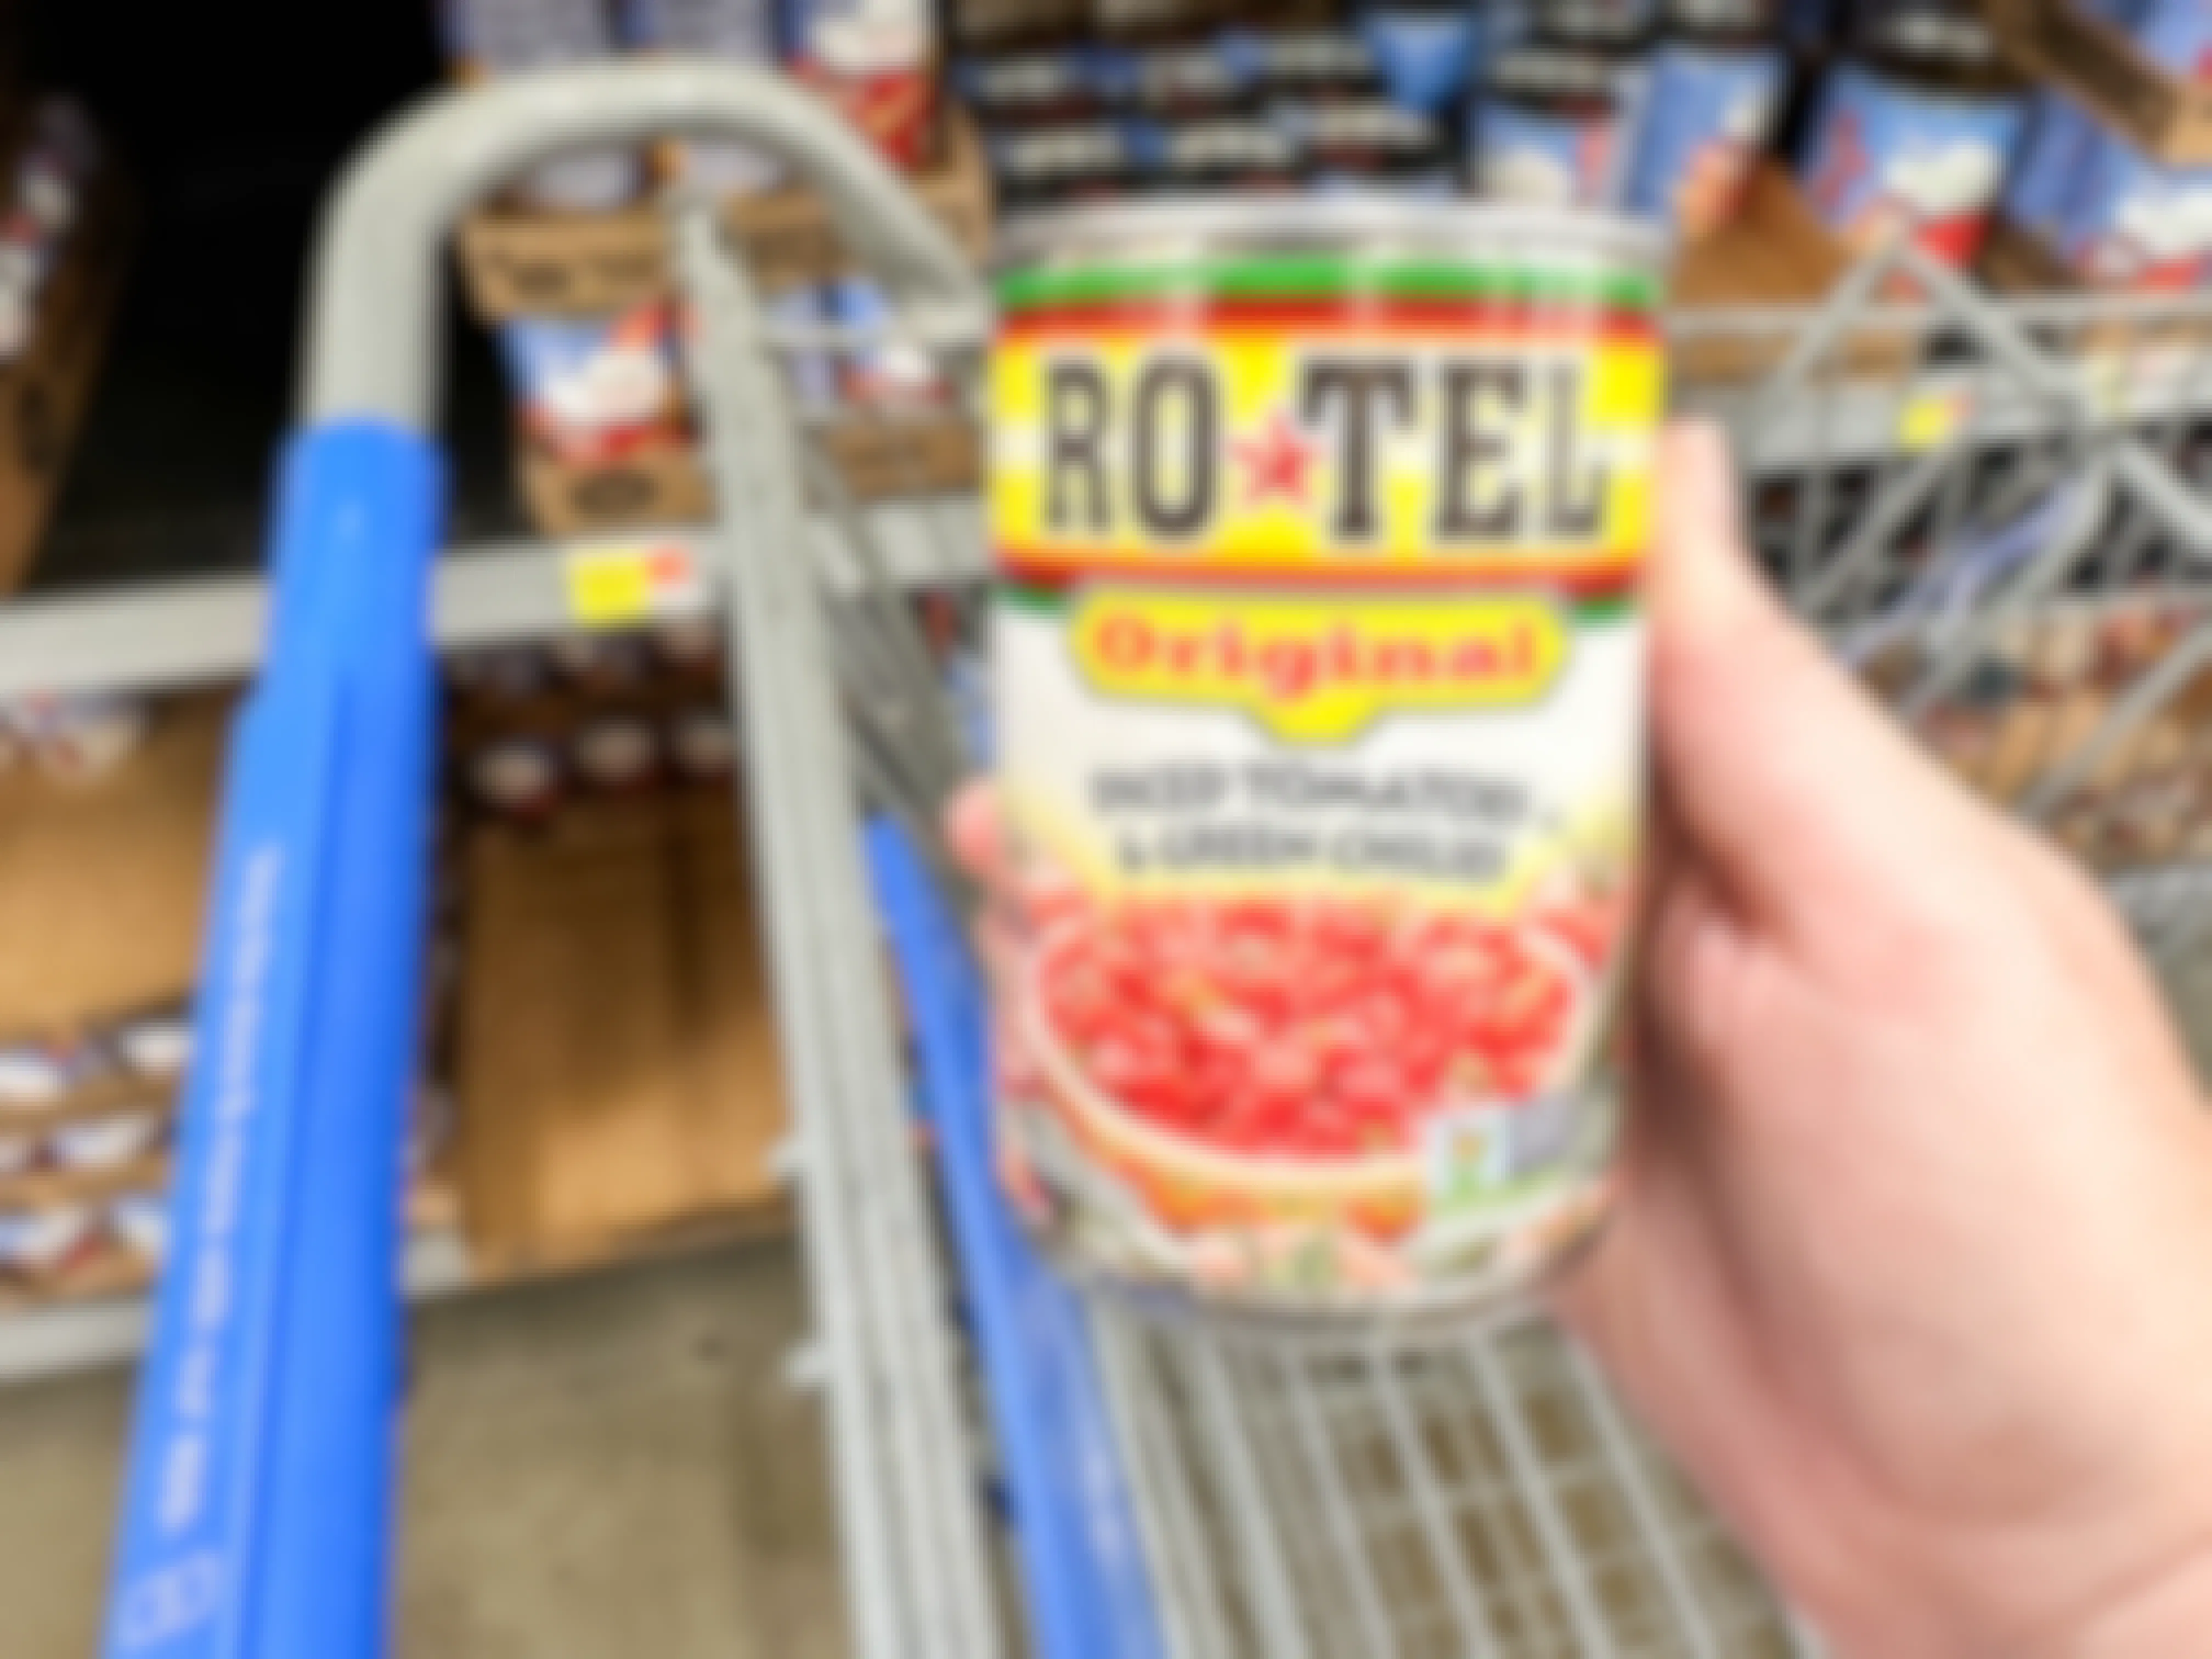 a can of rotel tomatoes being held in store 